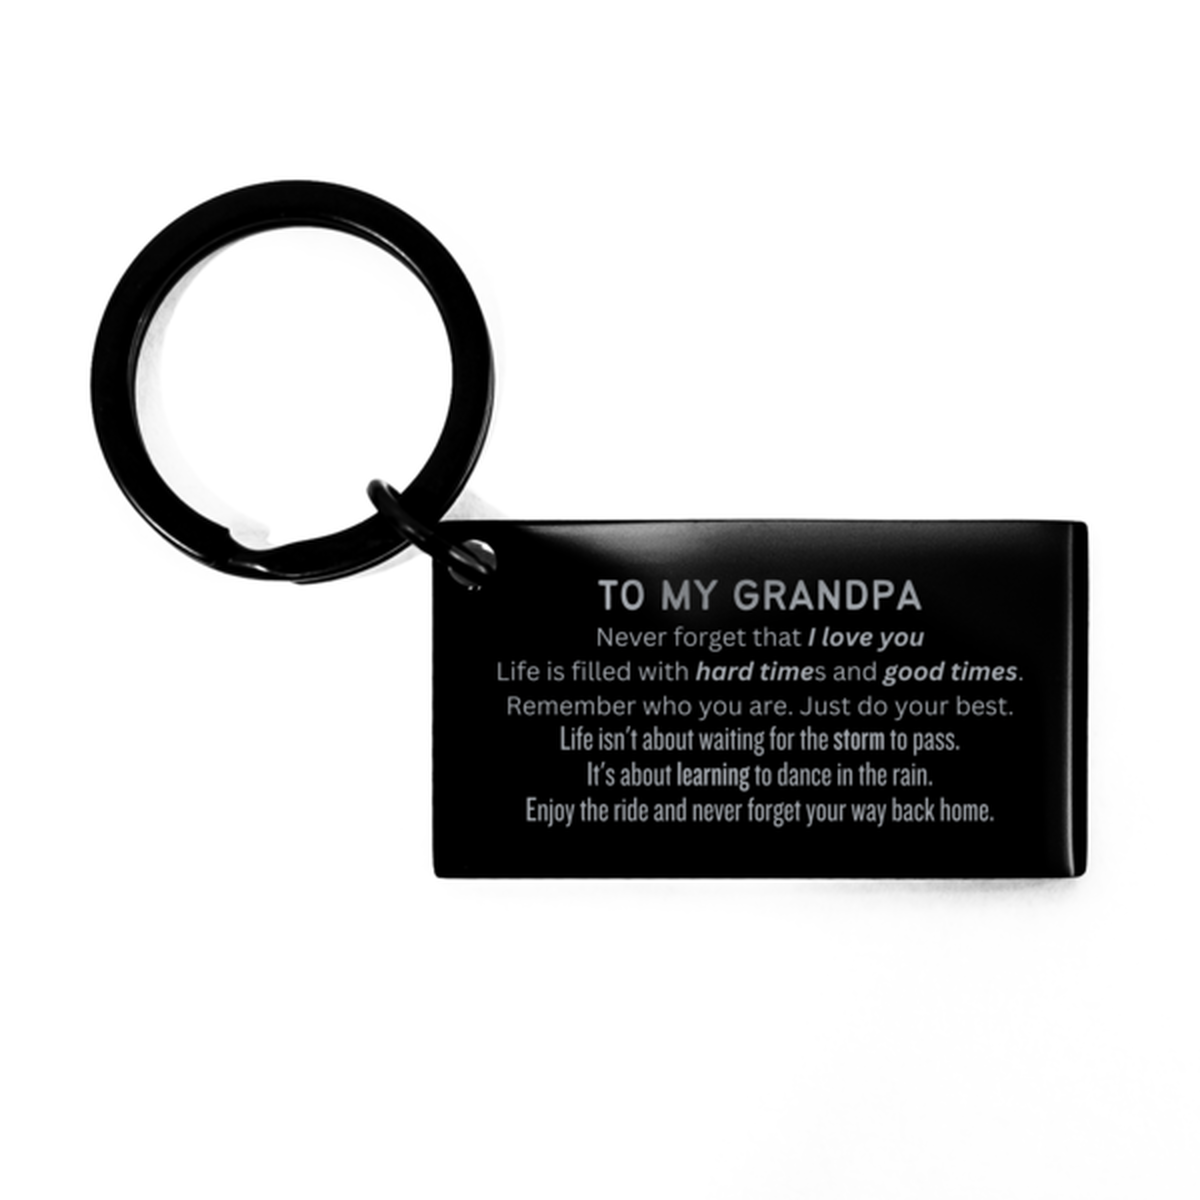 Christmas Grandpa Keychain Gifts, To My Grandpa Birthday Thank You Gifts For Grandpa, Graduation Unique Gifts For Grandpa To My Grandpa Never forget that I love you life is filled with hard times and good times. Remember who you are. Just do your best